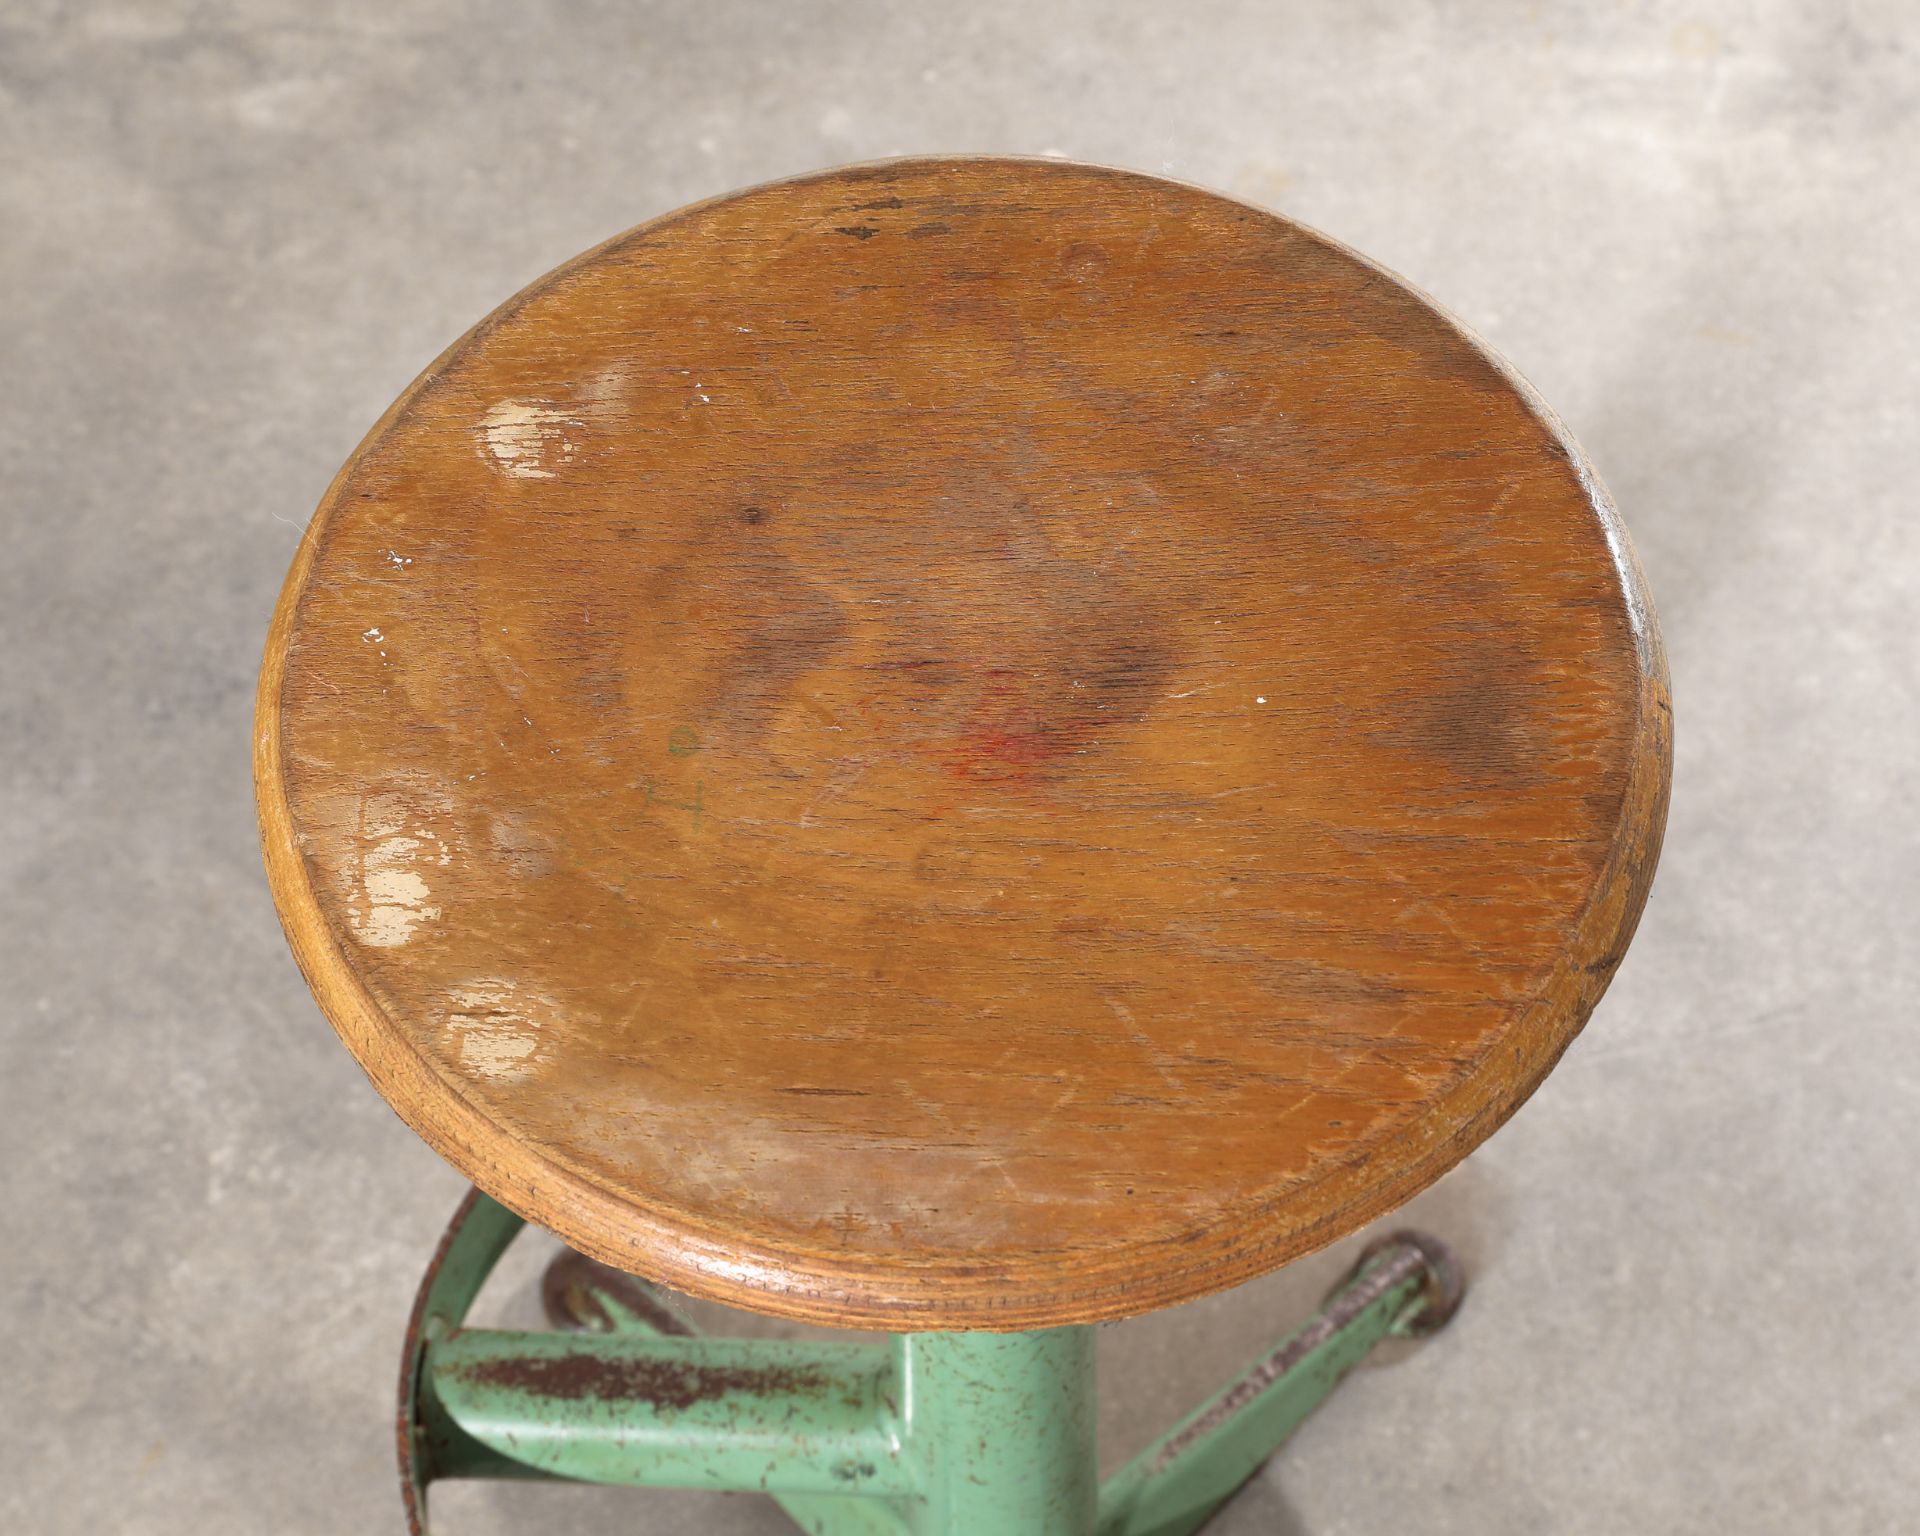 Jean Prouvé, Ateliers Jean Prouvé, rare rotating and height-adjustable stool - Image 2 of 4